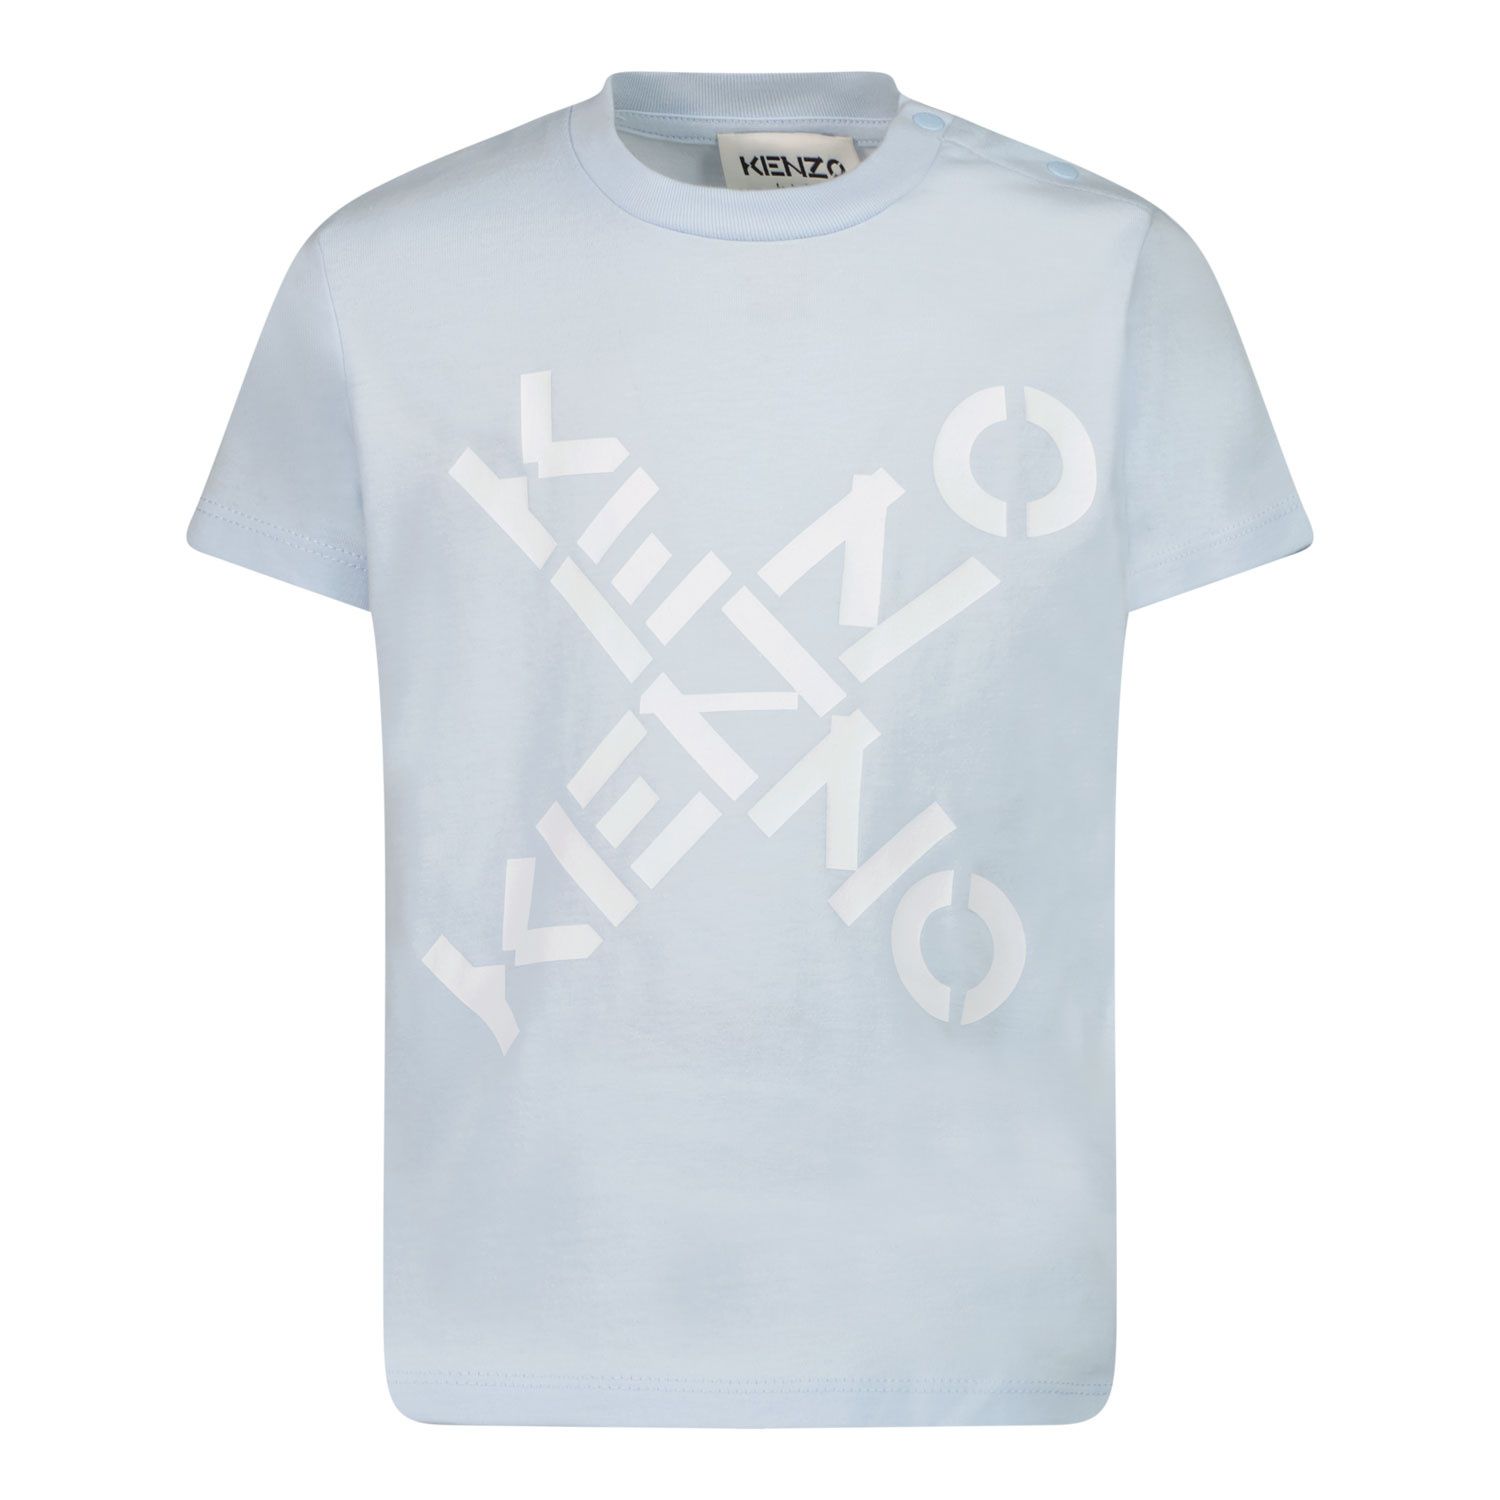 Picture of Kenzo K05395 baby shirt light blue